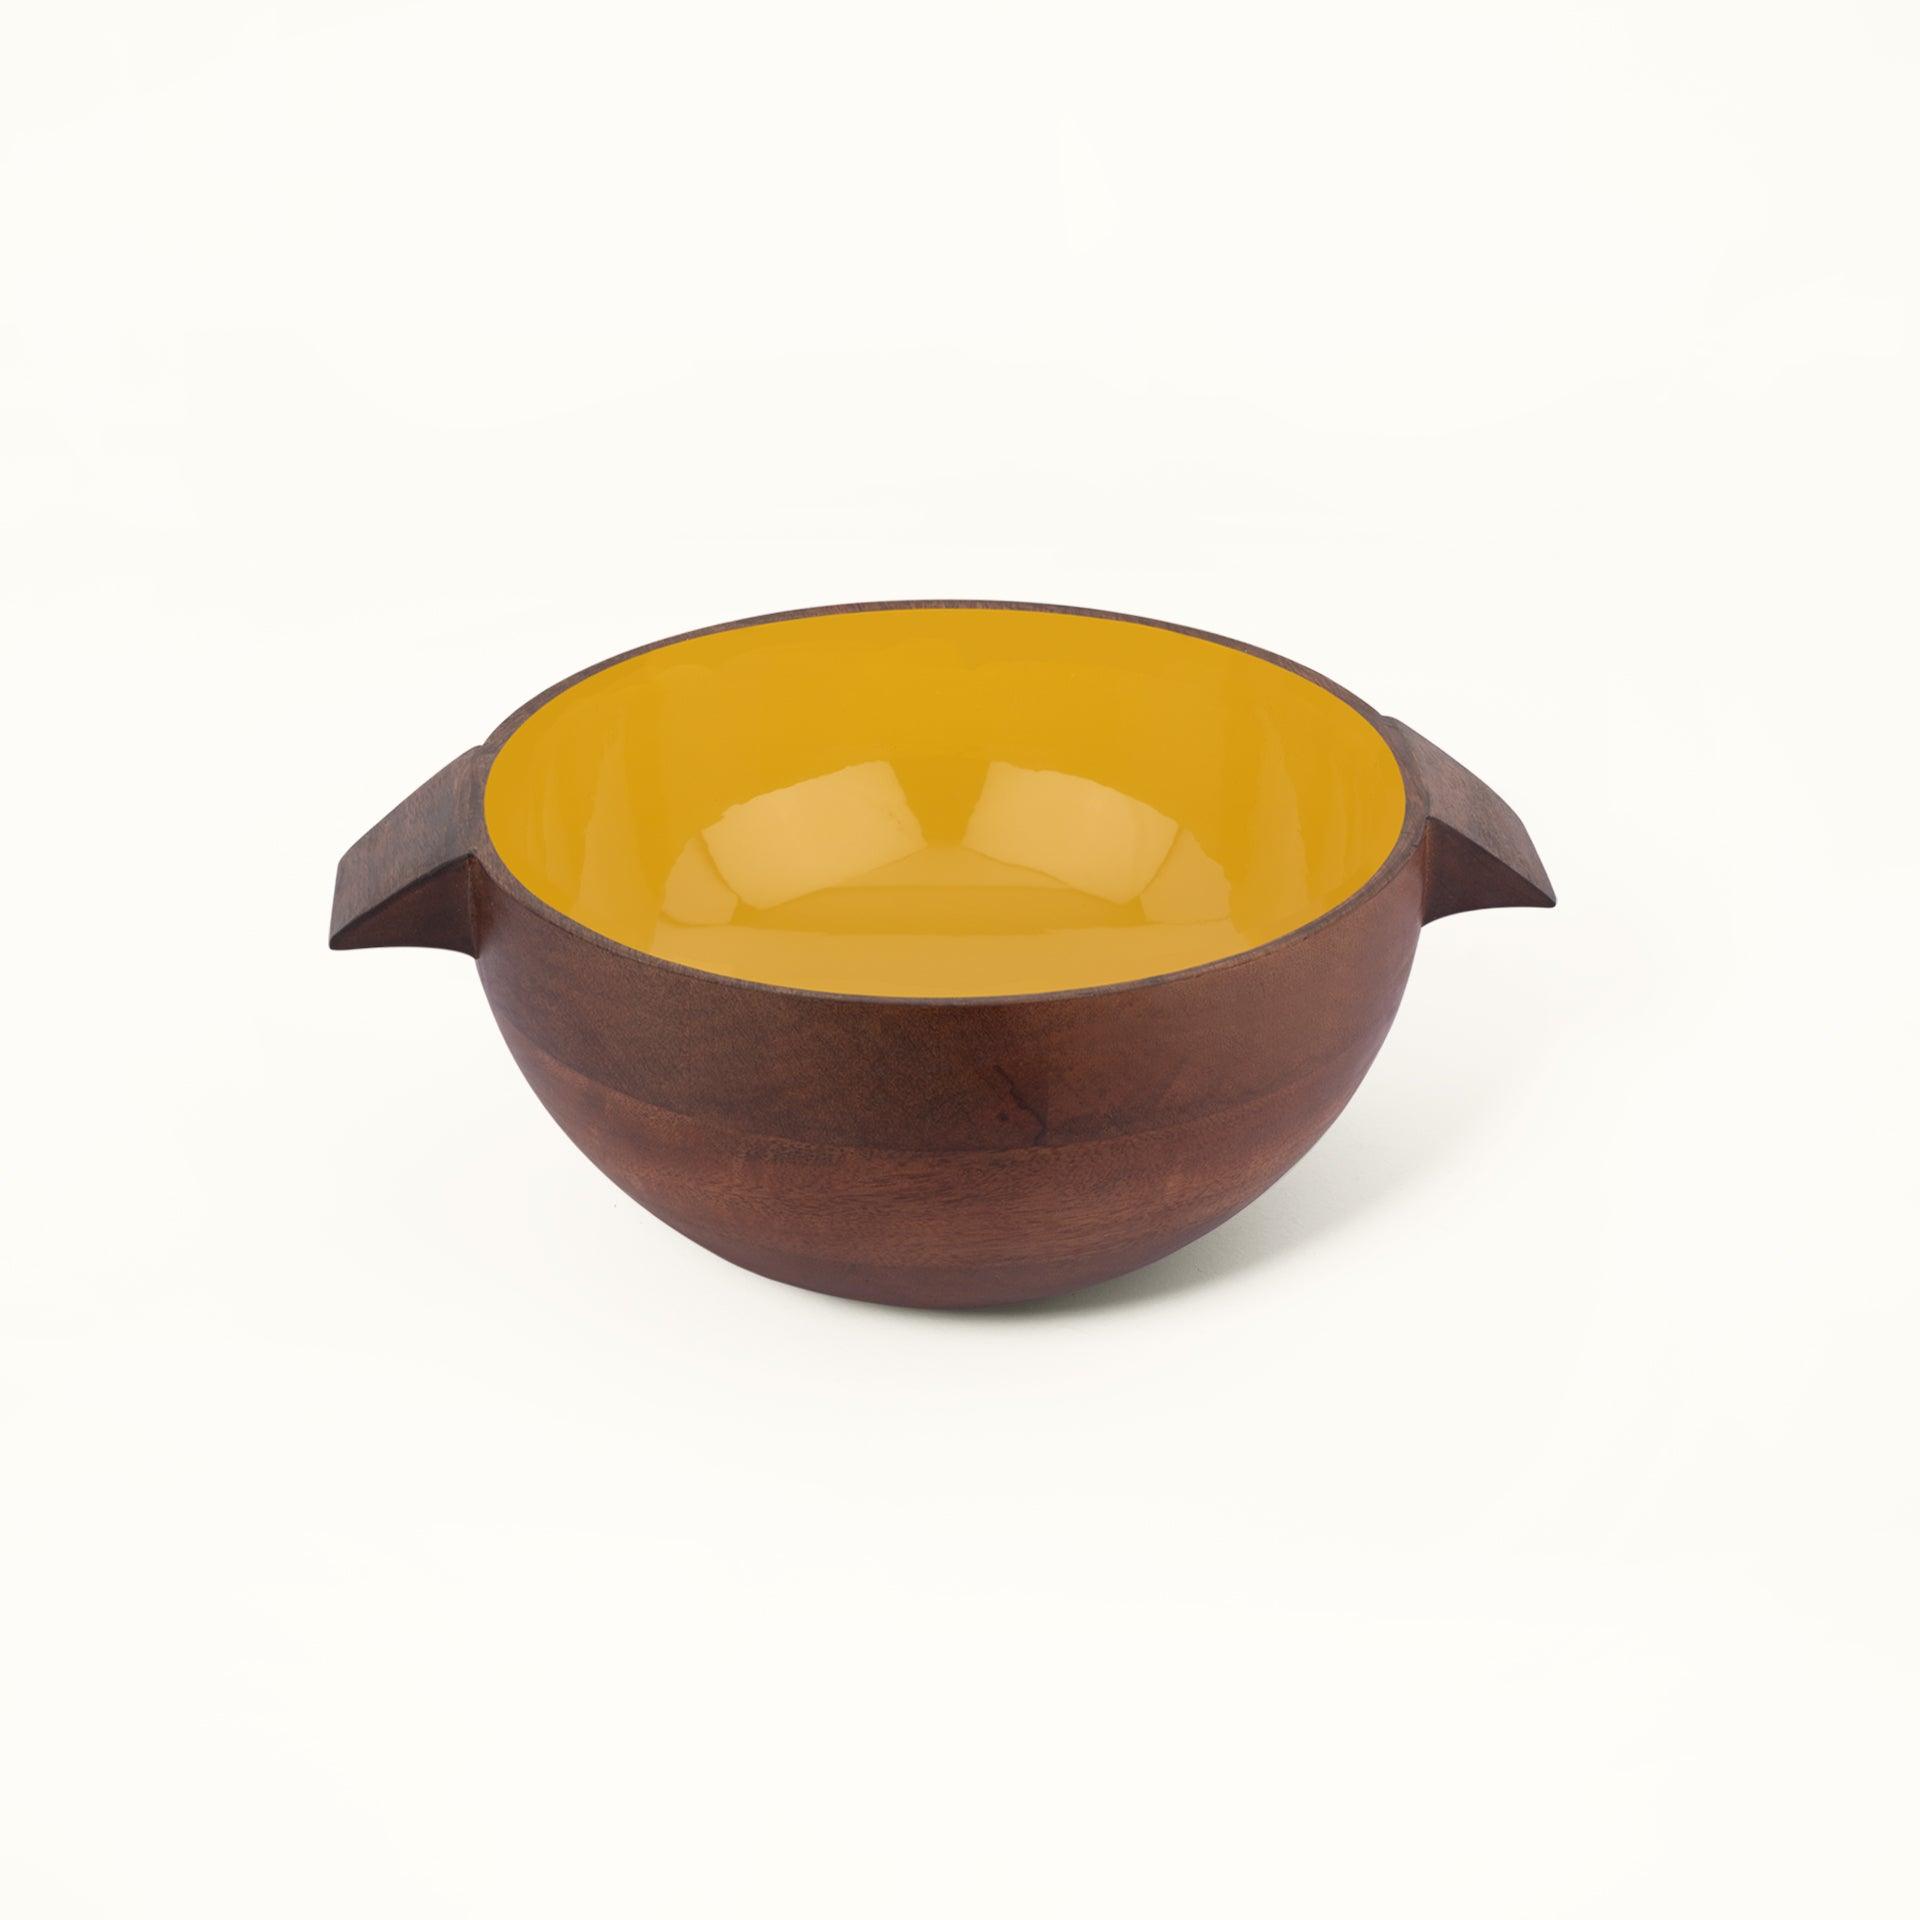 yellow orchard serving bowl with handles- medium